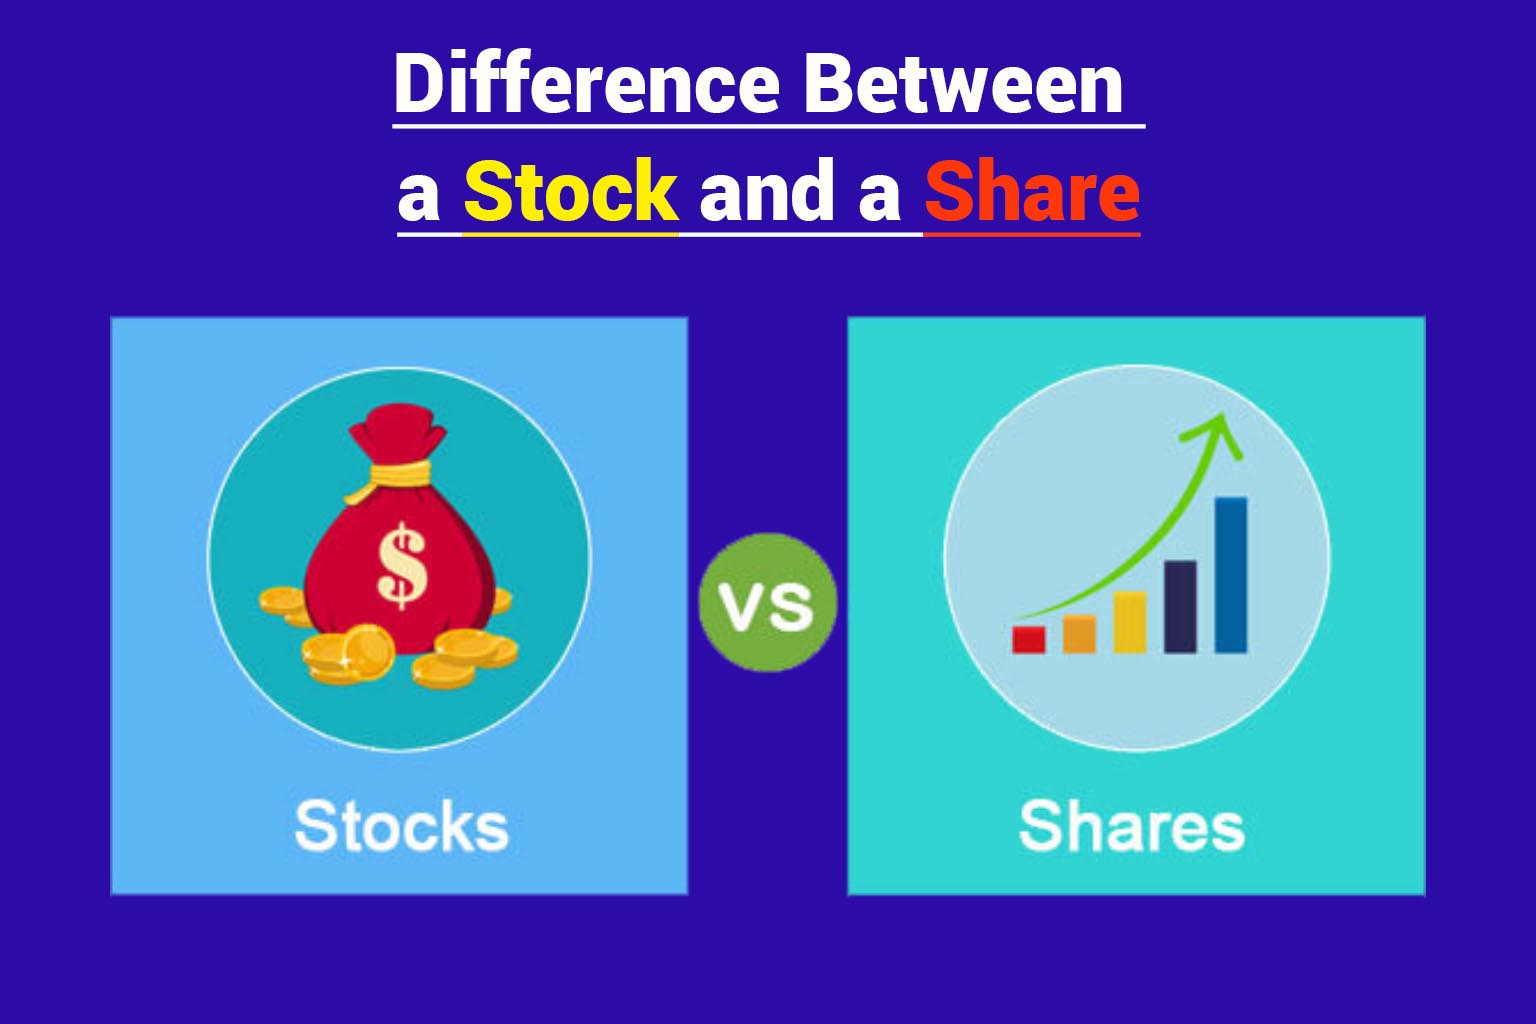 Difference Between a Stock and a Share